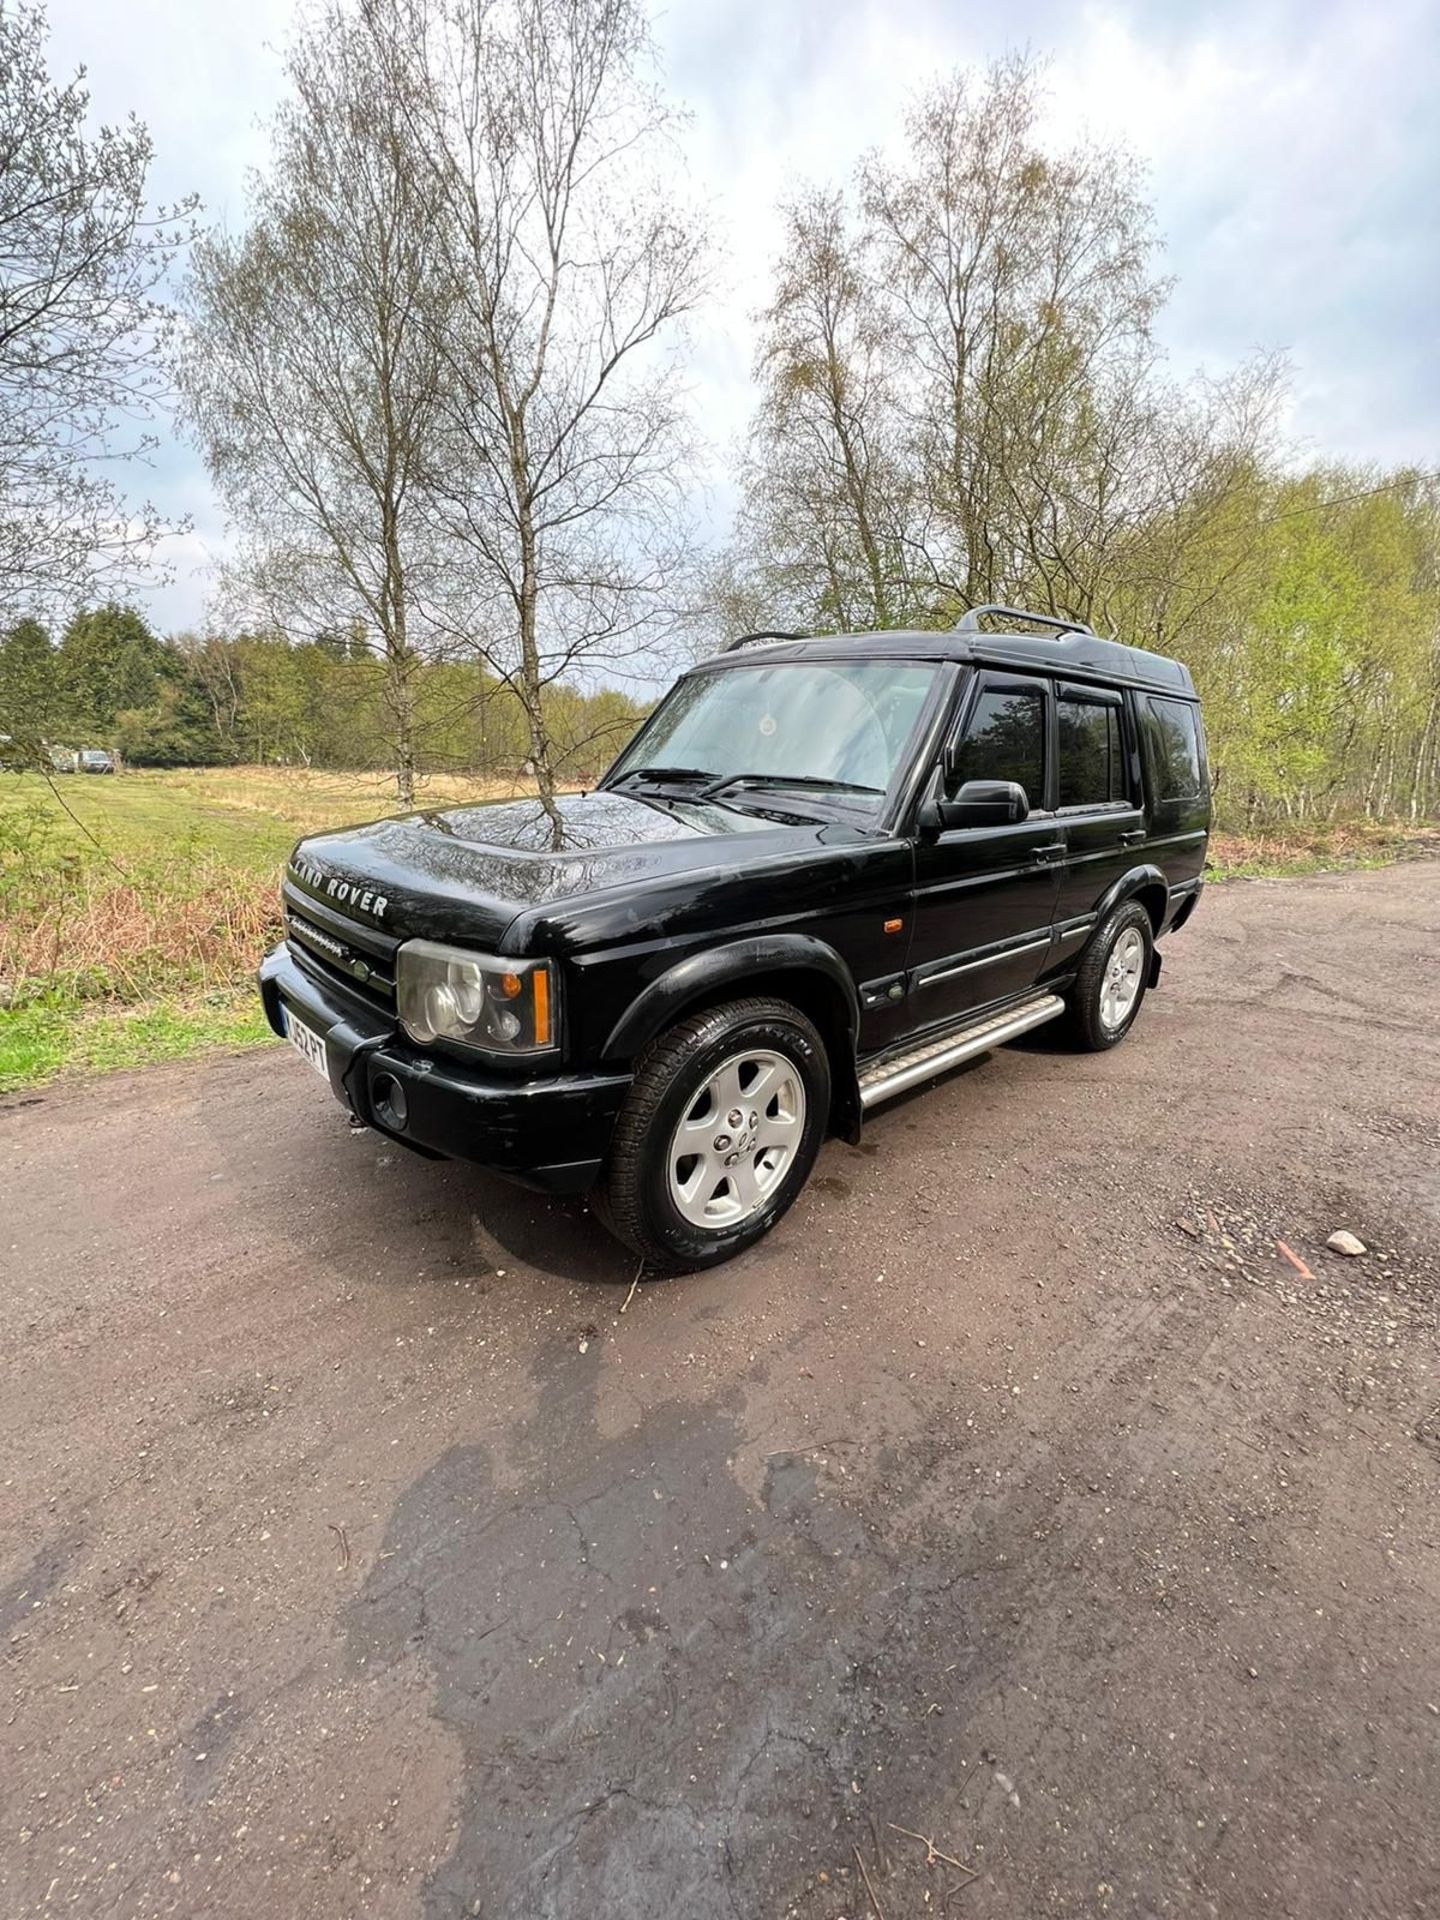 2002 52 PLATE LAND ROVER DISCOVERY 2 SUV ESTATE - TD5 - TOP OF THE RANGE - HALF LEATHER SEATS - Image 4 of 15